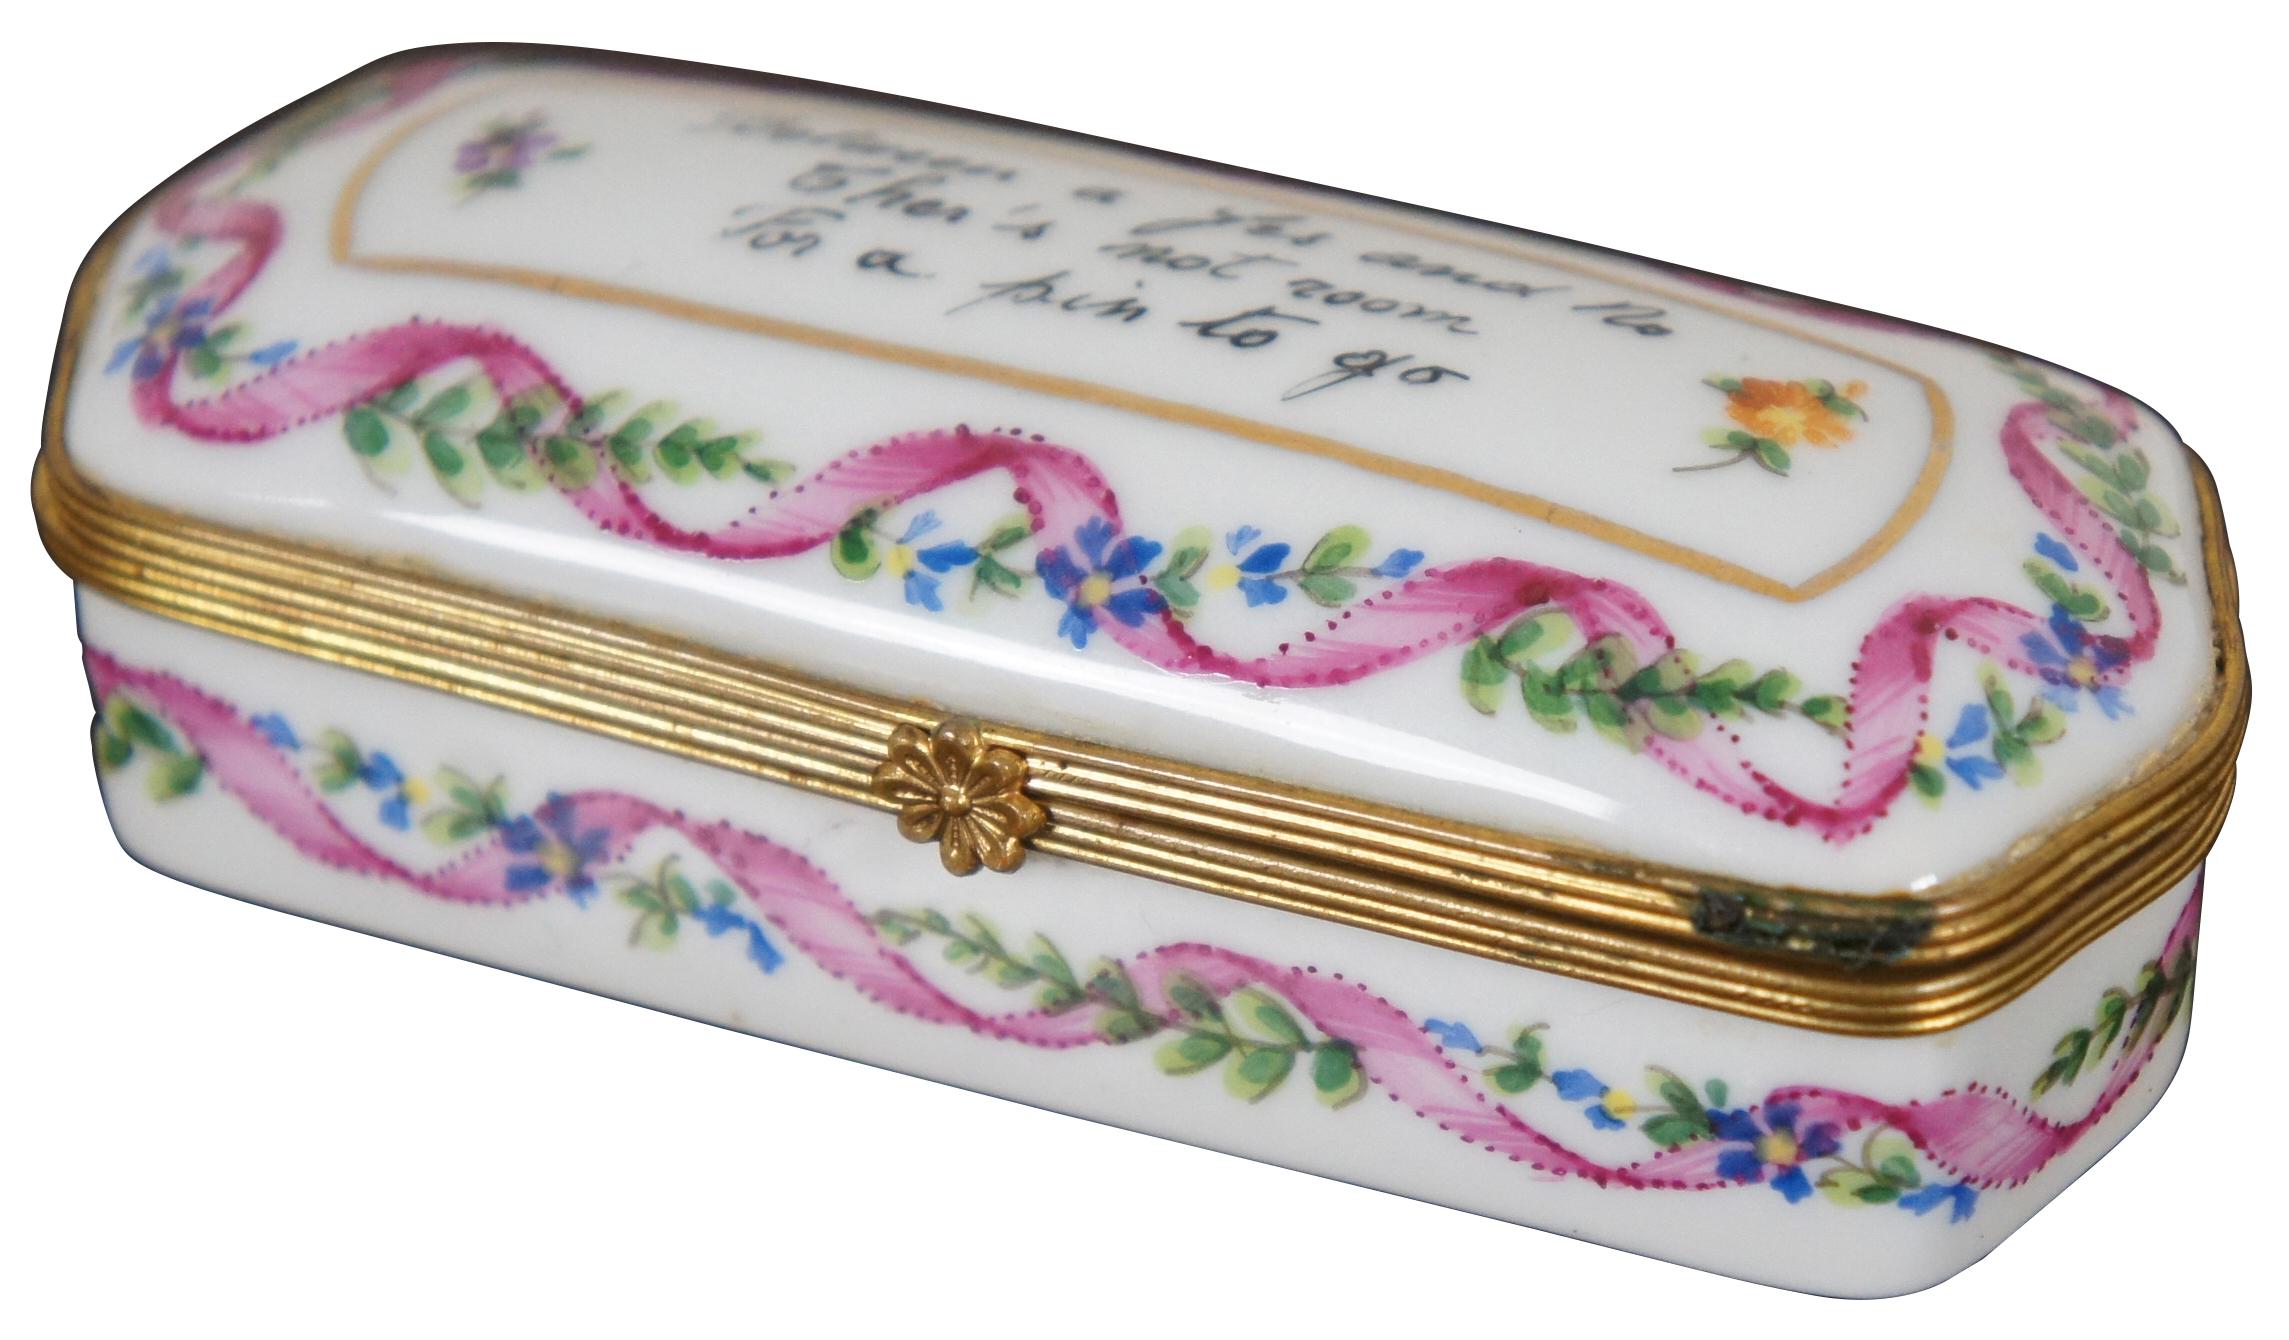 Vintage Tiffany & Company Private Stock hand painted rectangular Limoges trinket or pill box, numbered 136; white porcelain painted with a pink ribbon entwined with a blue flowered vine and the phrase “Between a Yes and No Ther’s Not Room for a Pin